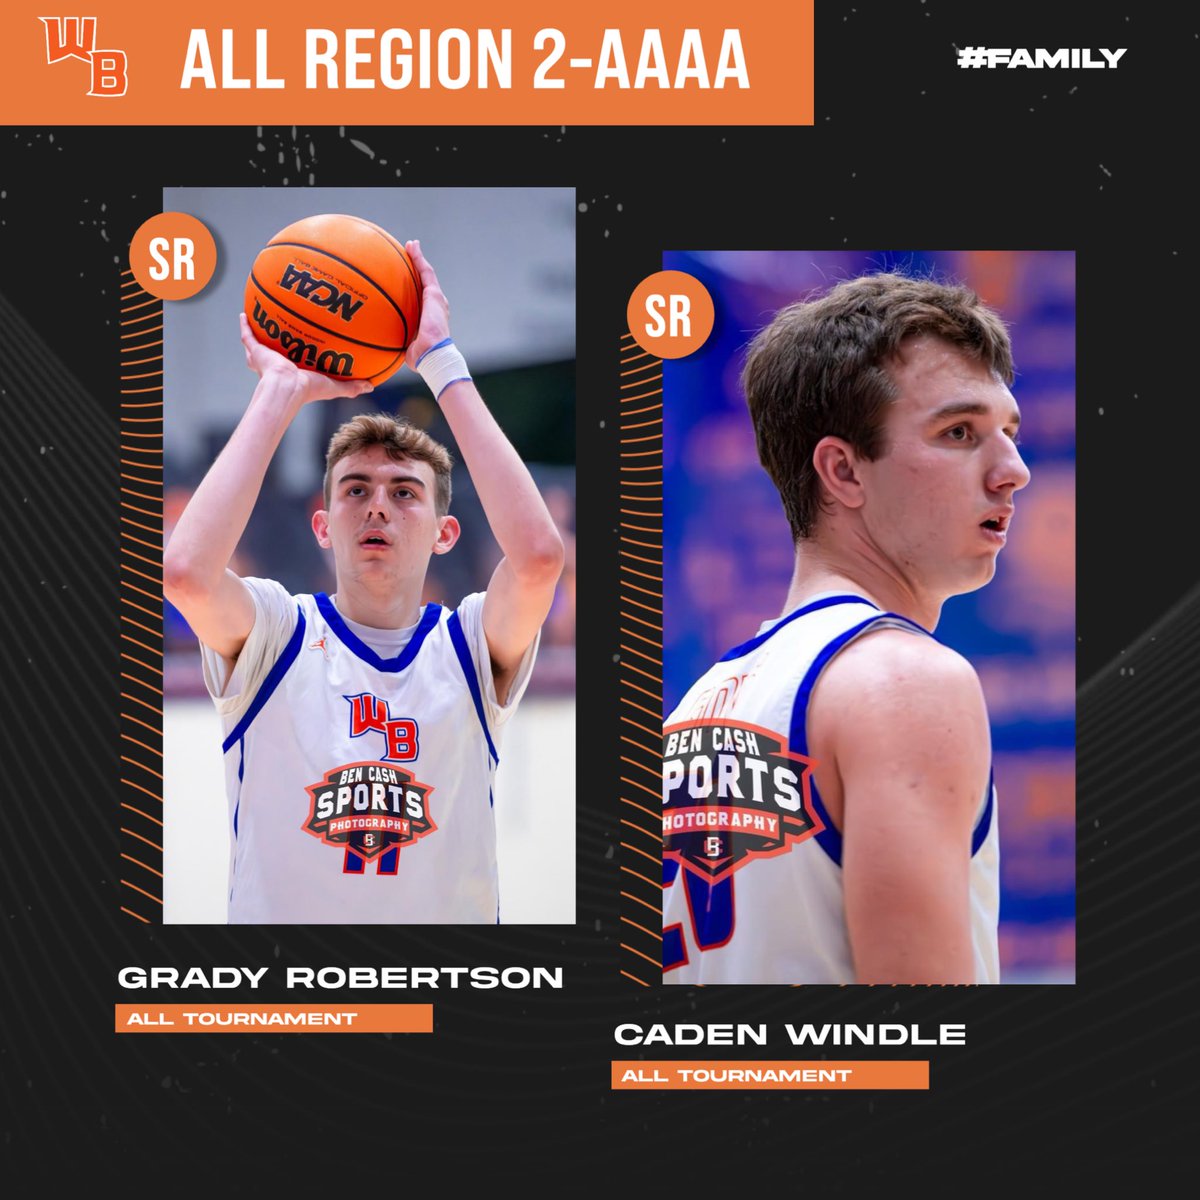 Congrats to @Grady_Rob11 and @CadeDog20 being selected to the All Region 2-AAAA team!! #family